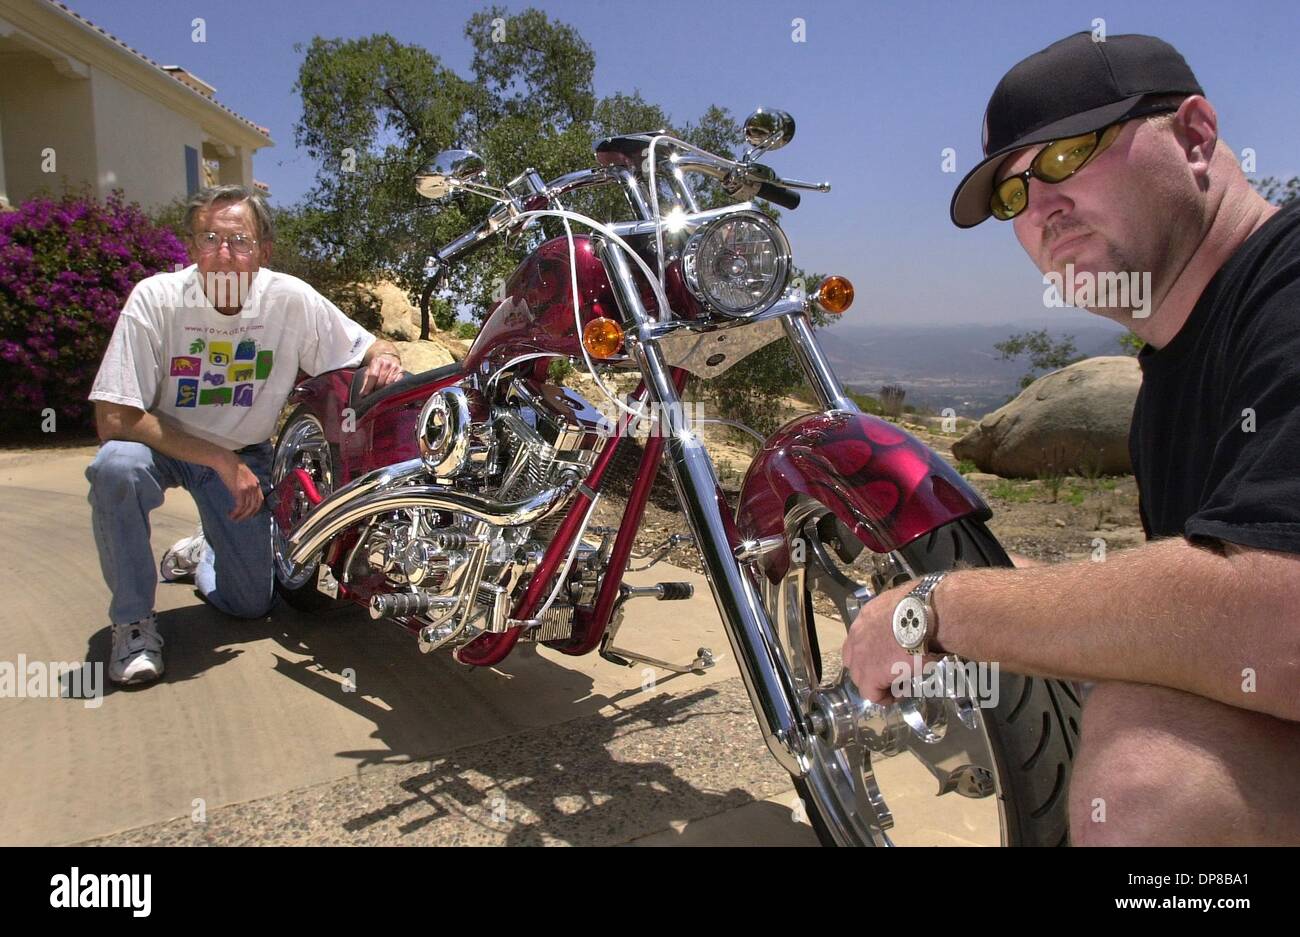 (Published 7/7/2004, NI-6, UTS1818165; Republished 7/9/2004, NC-9, UTS1818636) ---PLEASE RUN IN COLOR---Standing with a 7,000 Ultra Motorcycle Company Street Stock Photo